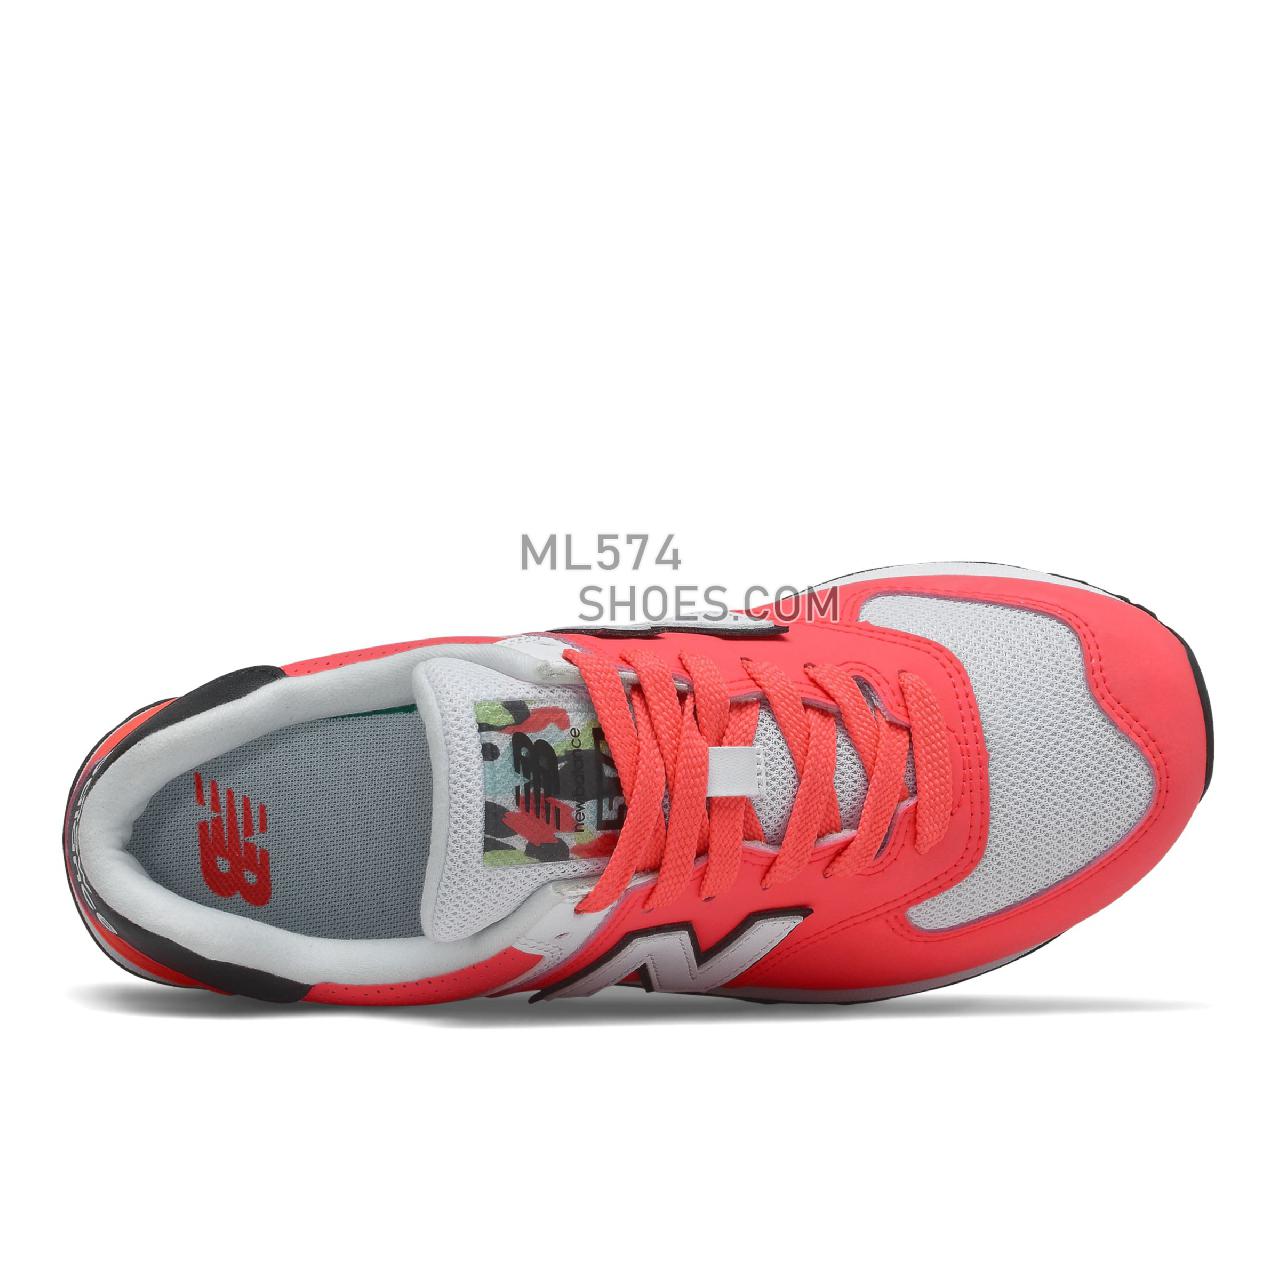 New Balance 574 - Women's Classic Sneakers - Vivid Coral with White - WL574CU2